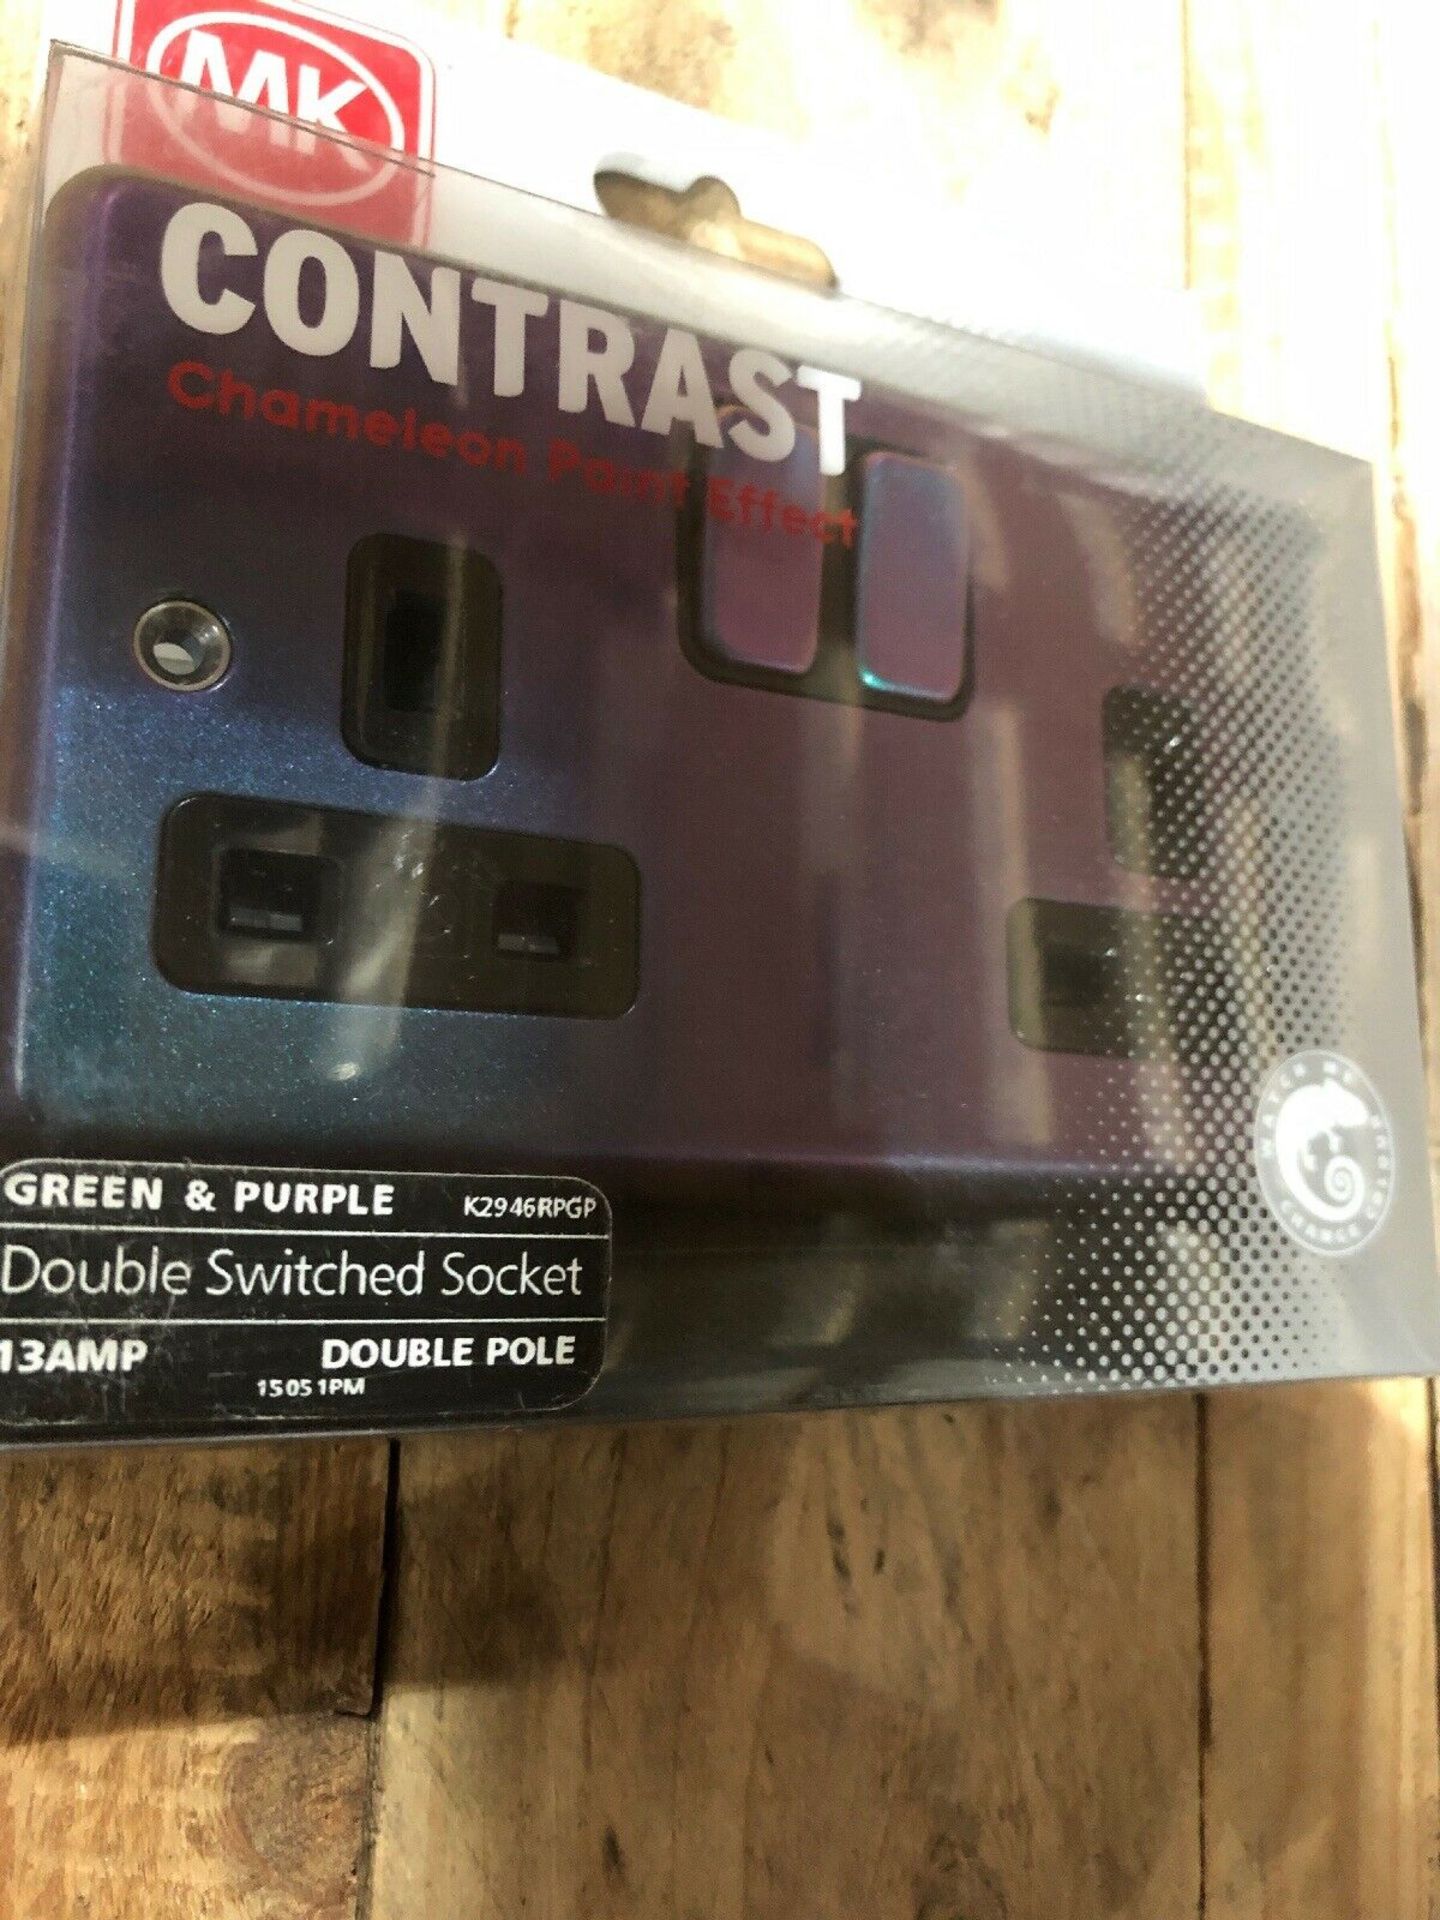 MK Contrast 13amp Green and Purple Double Dwitched Socket